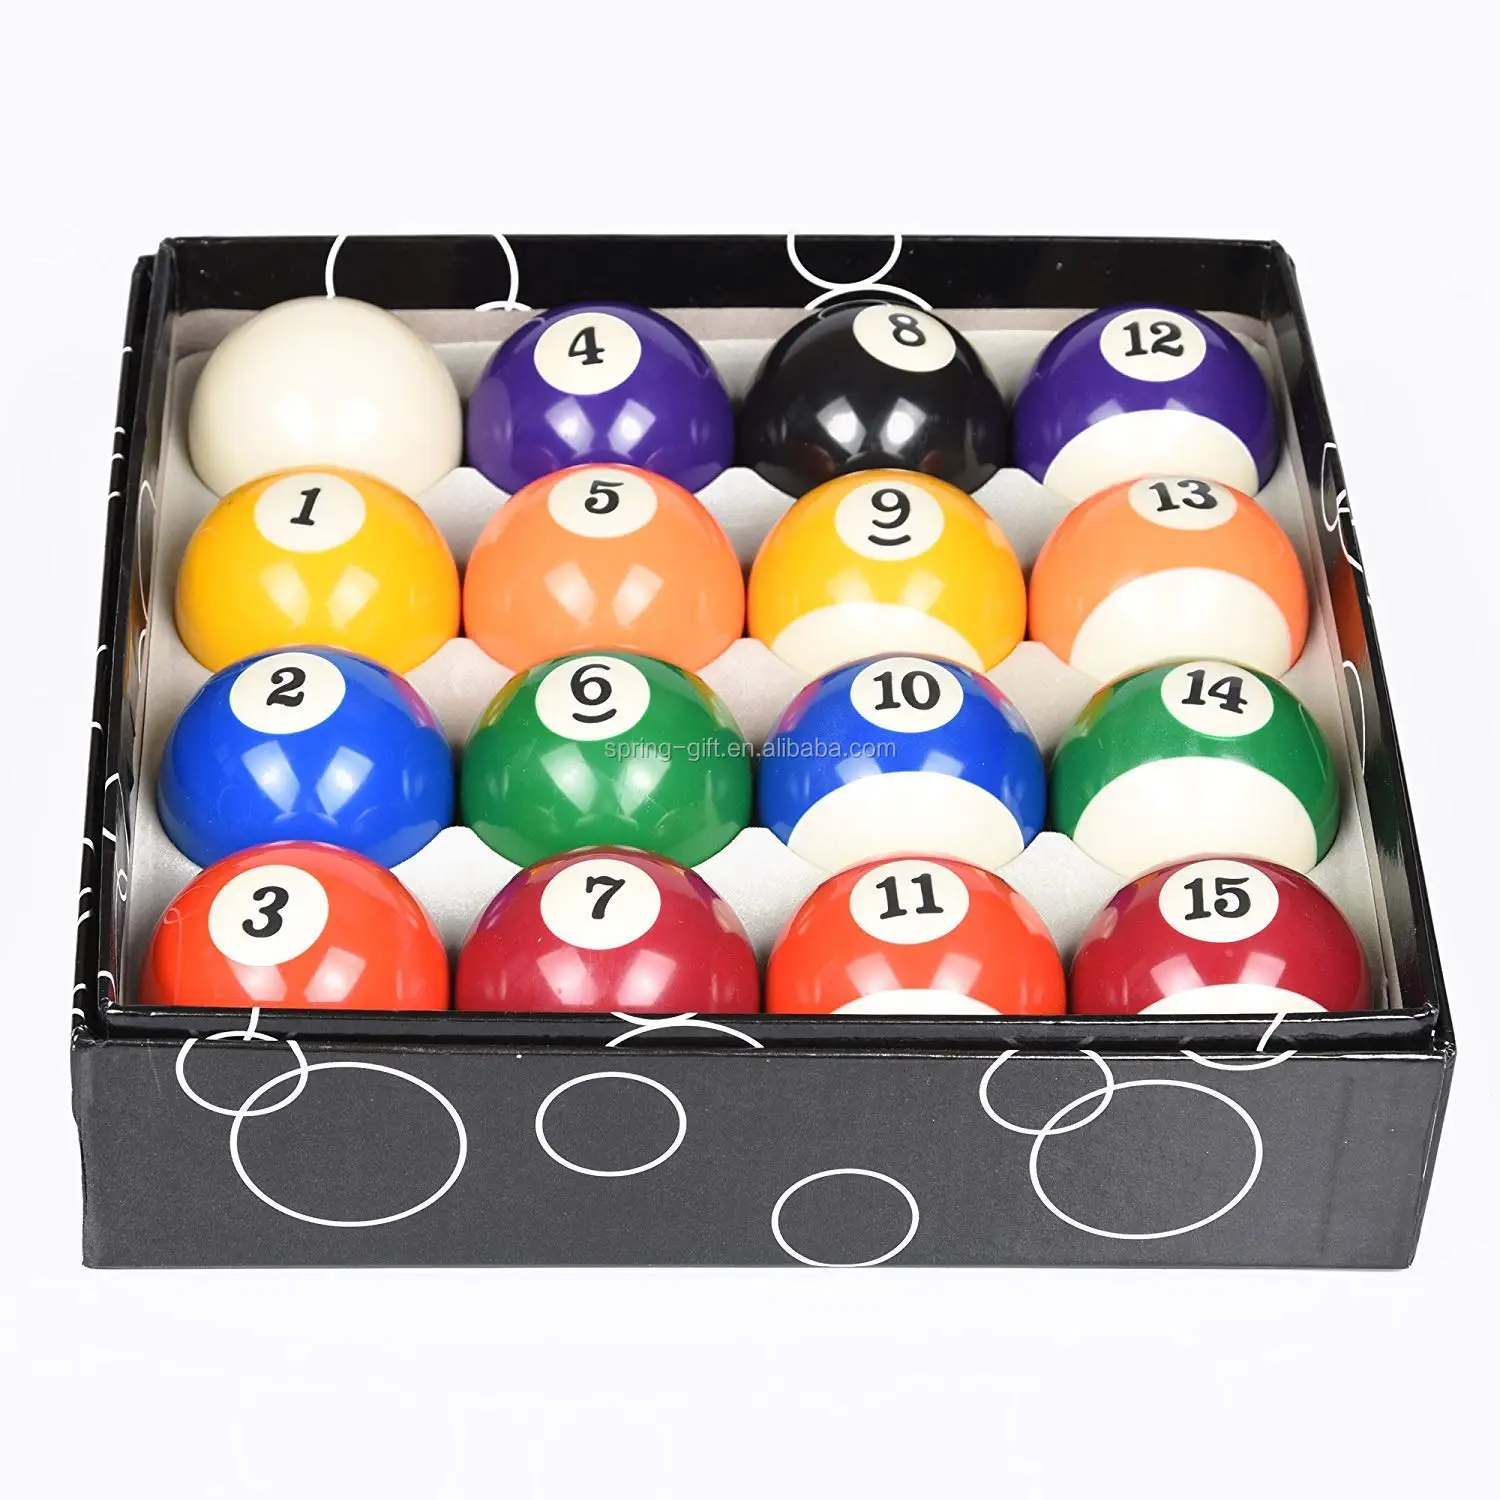 Collapsar Deluxe 2-1//4 Billiard Pool Balls Marble-Swirl Style Billiards Ball Complete 16 Ball Set Several Style Available